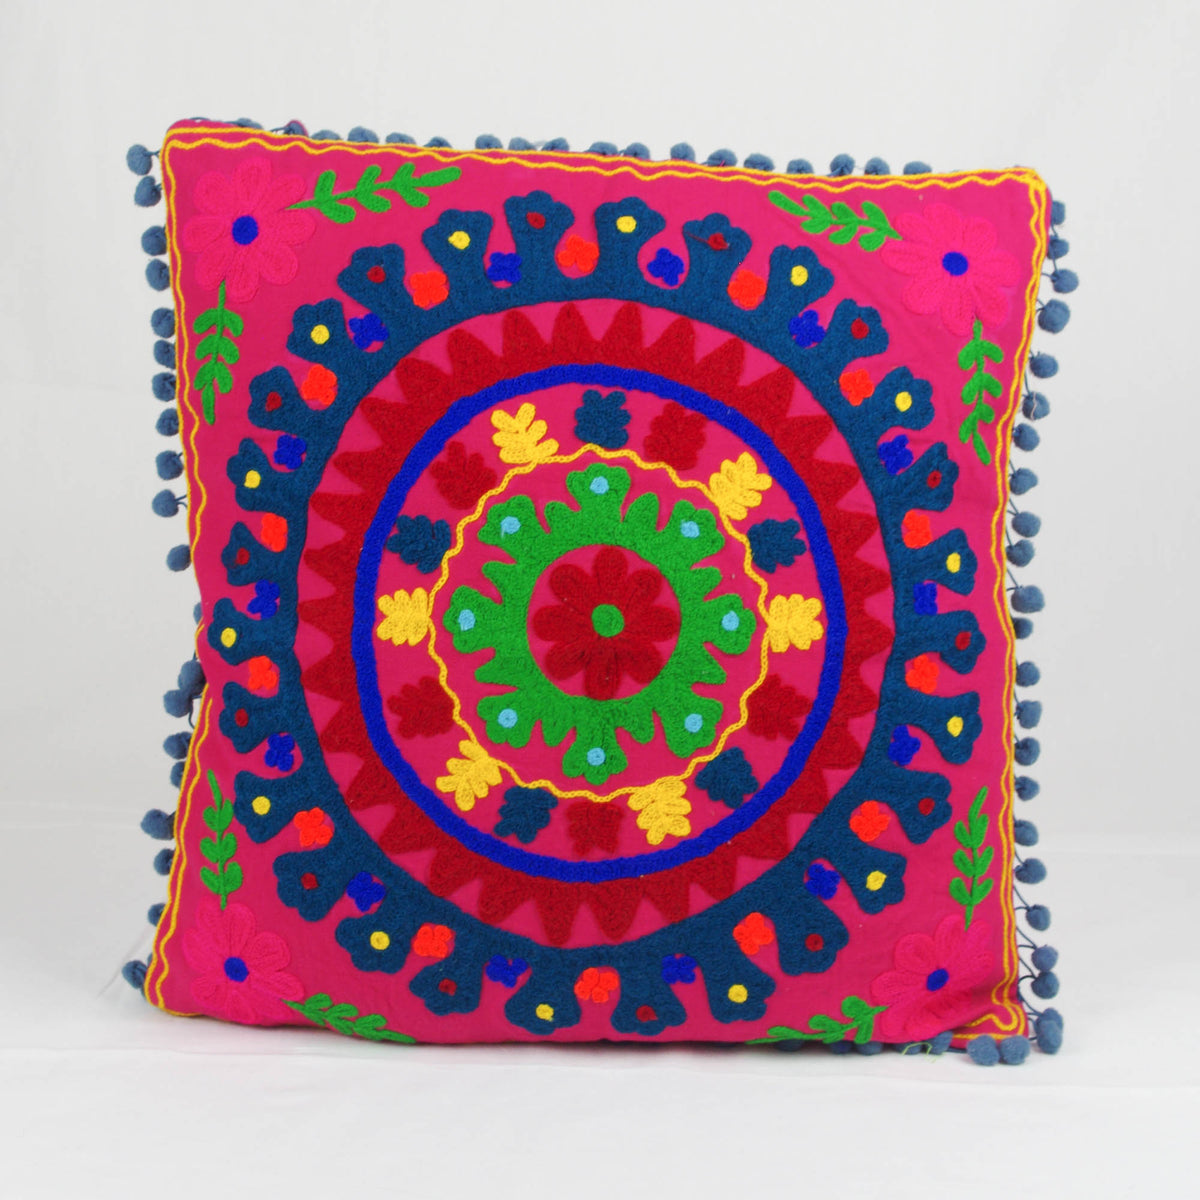 Suzani Woolen Embroidered Cotton Square Cushion Cover - Pink